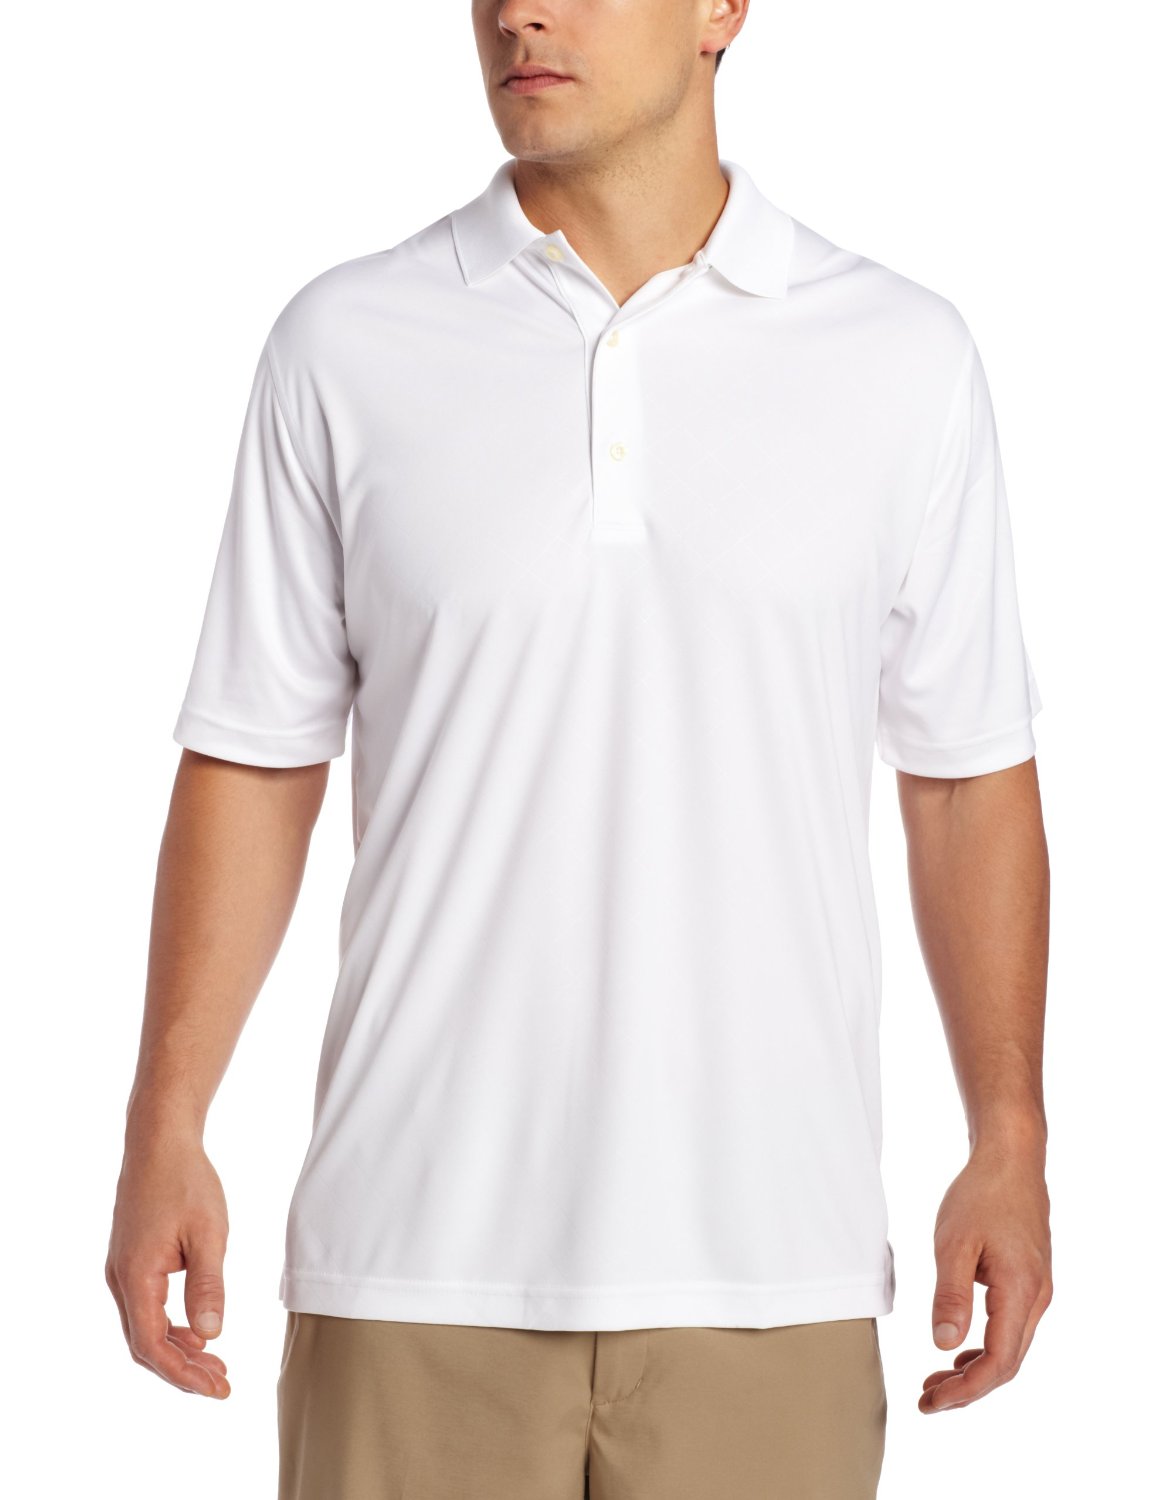 Mens Greg Norman Imperial Embossed Golf Polo Shirts